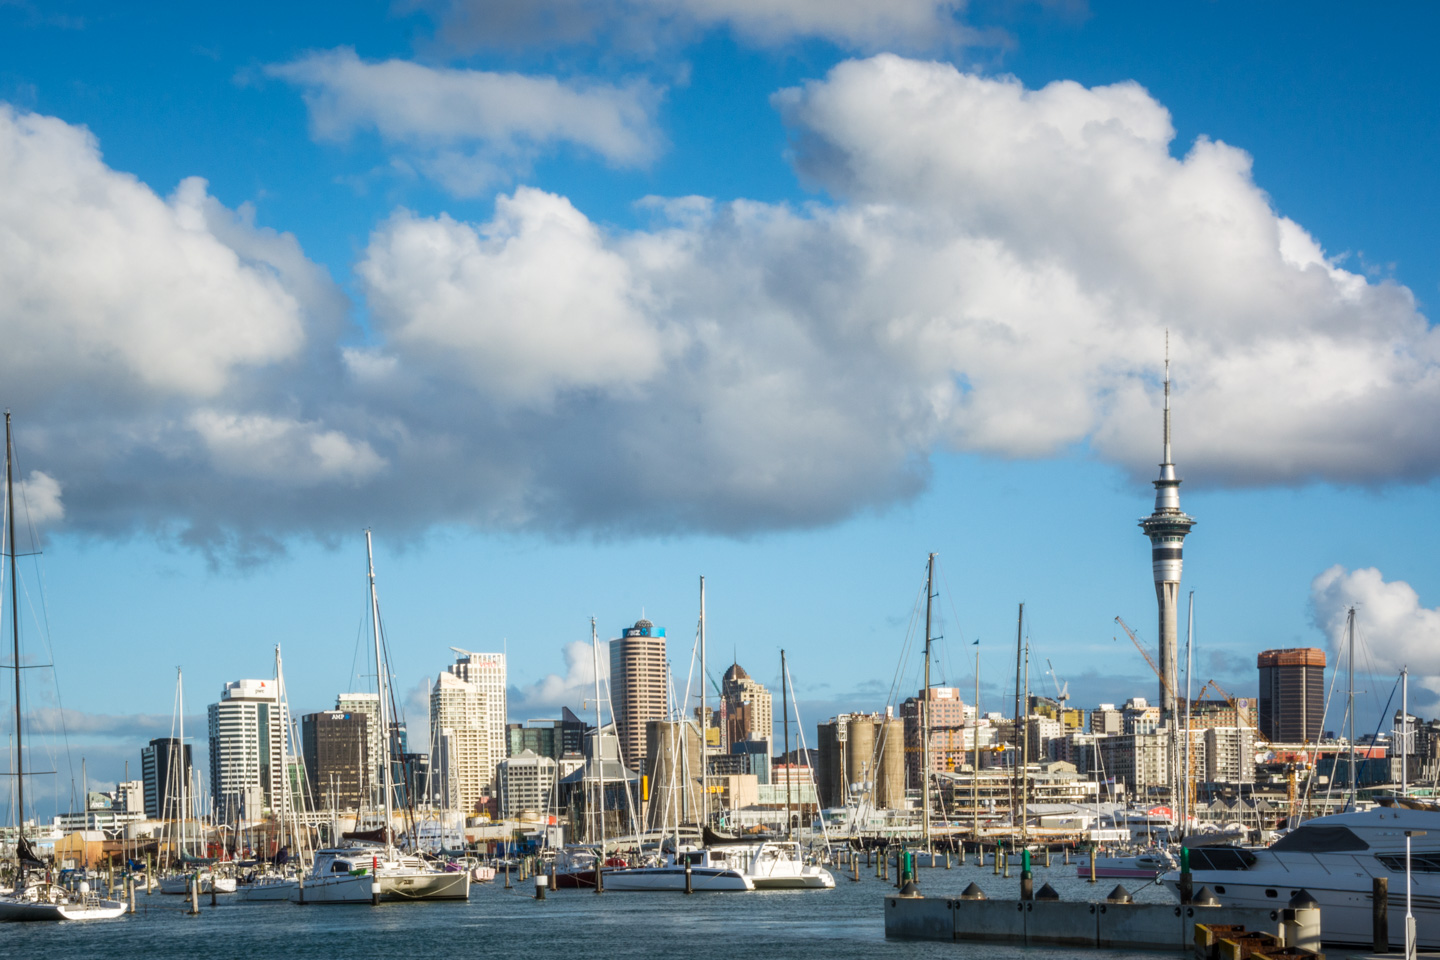 Auckland – Westhaven Marina